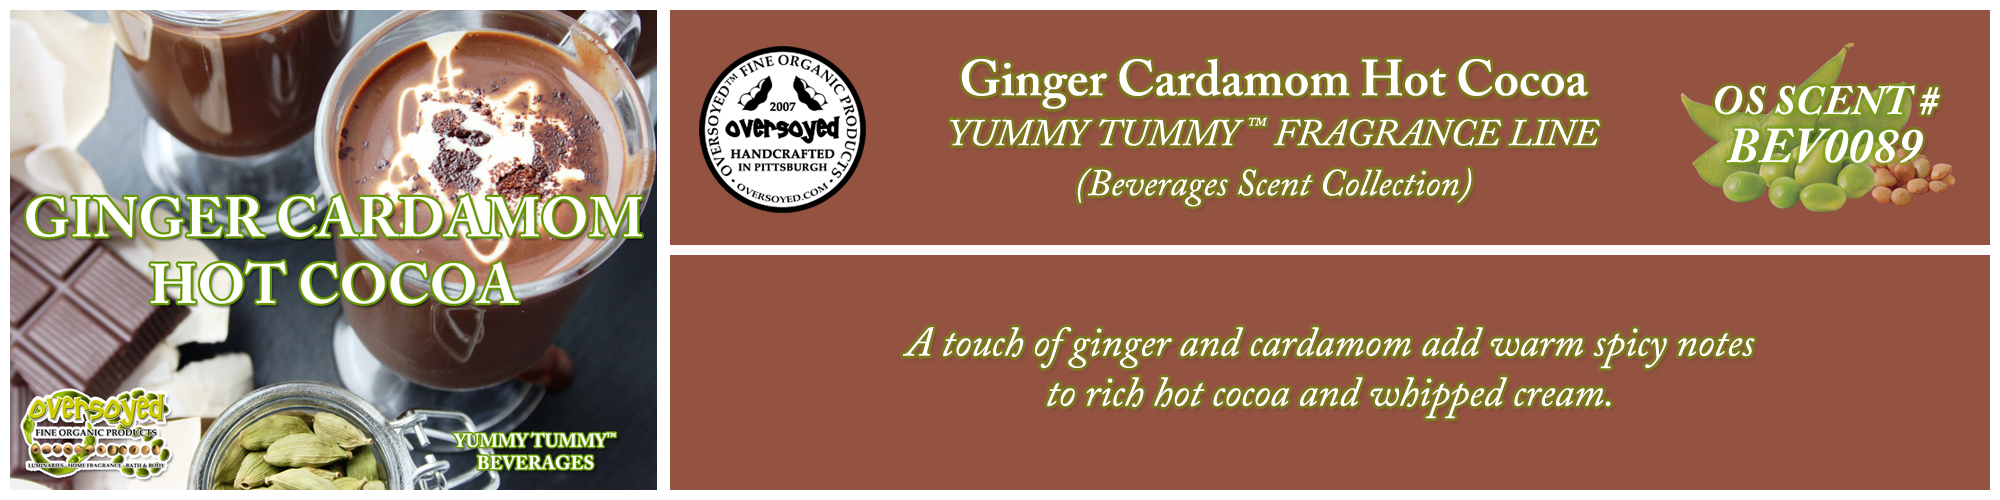 Ginger Cardamom Hot Cocoa Handcrafted Products Collection